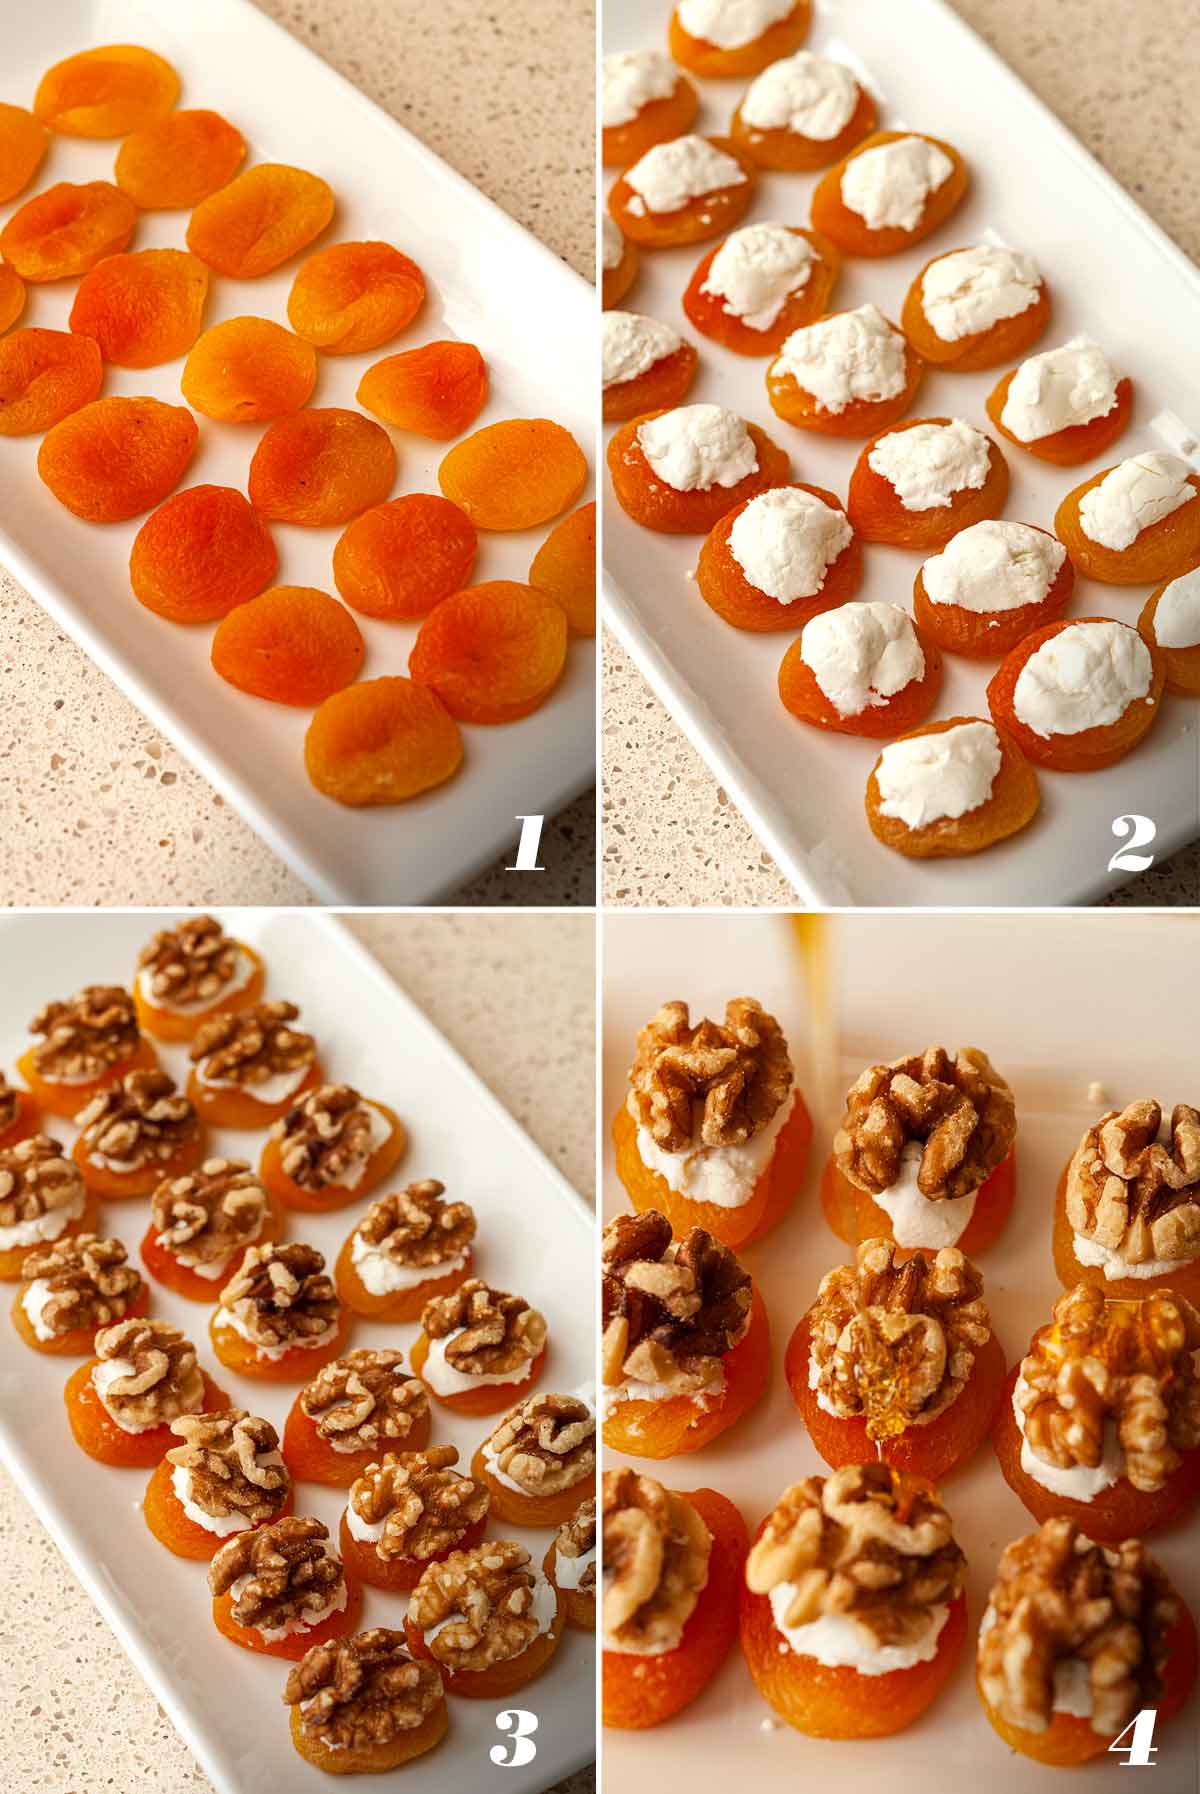 A collage of 4 numbered images showing how to make apricot appetizers.